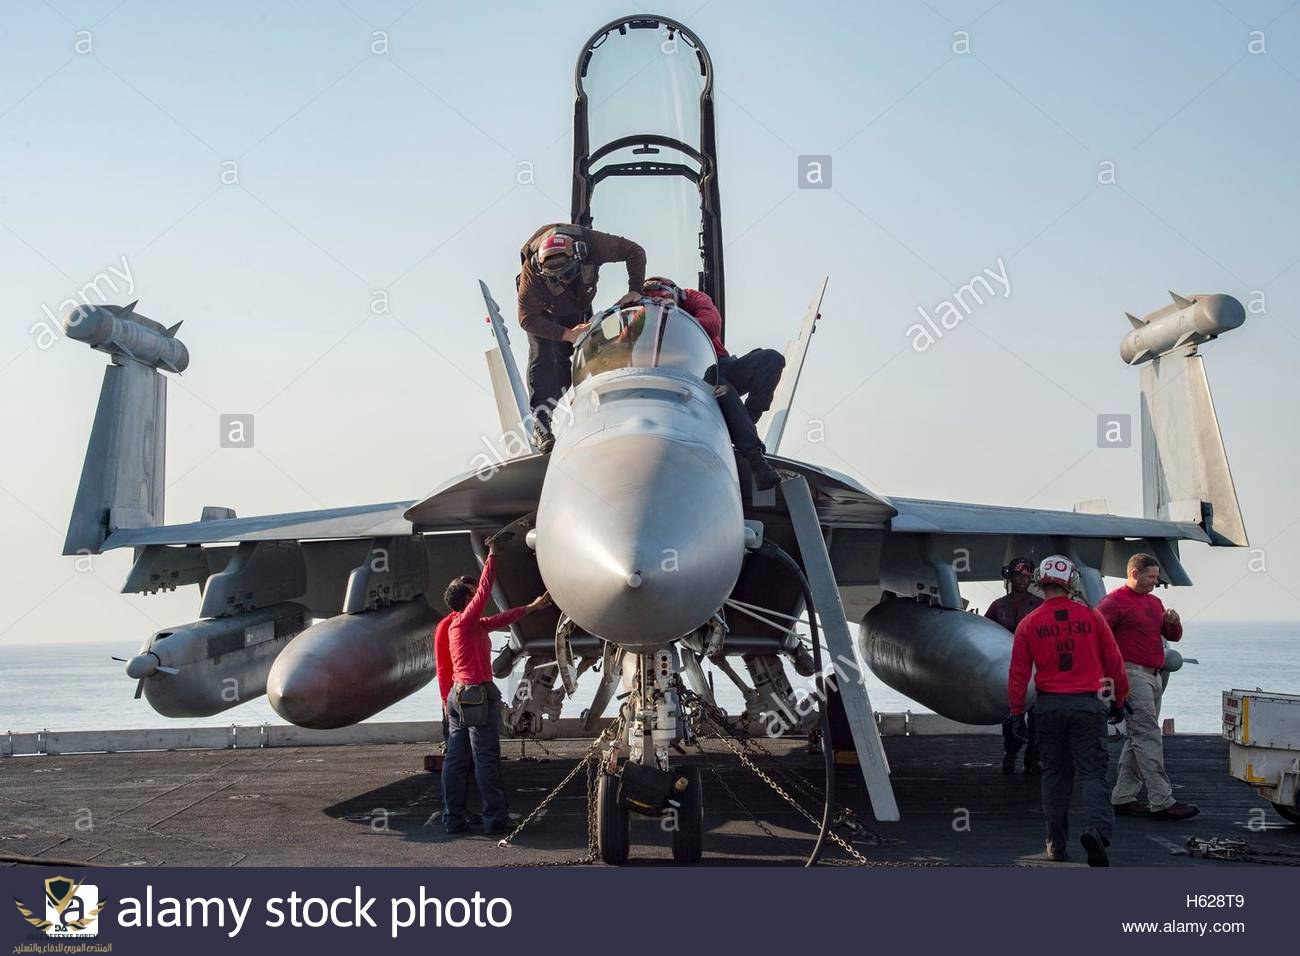 us-sailors-conduct-inspection-on-an-ea-18g-growler-fighter-aircraft-H628T9.jpg